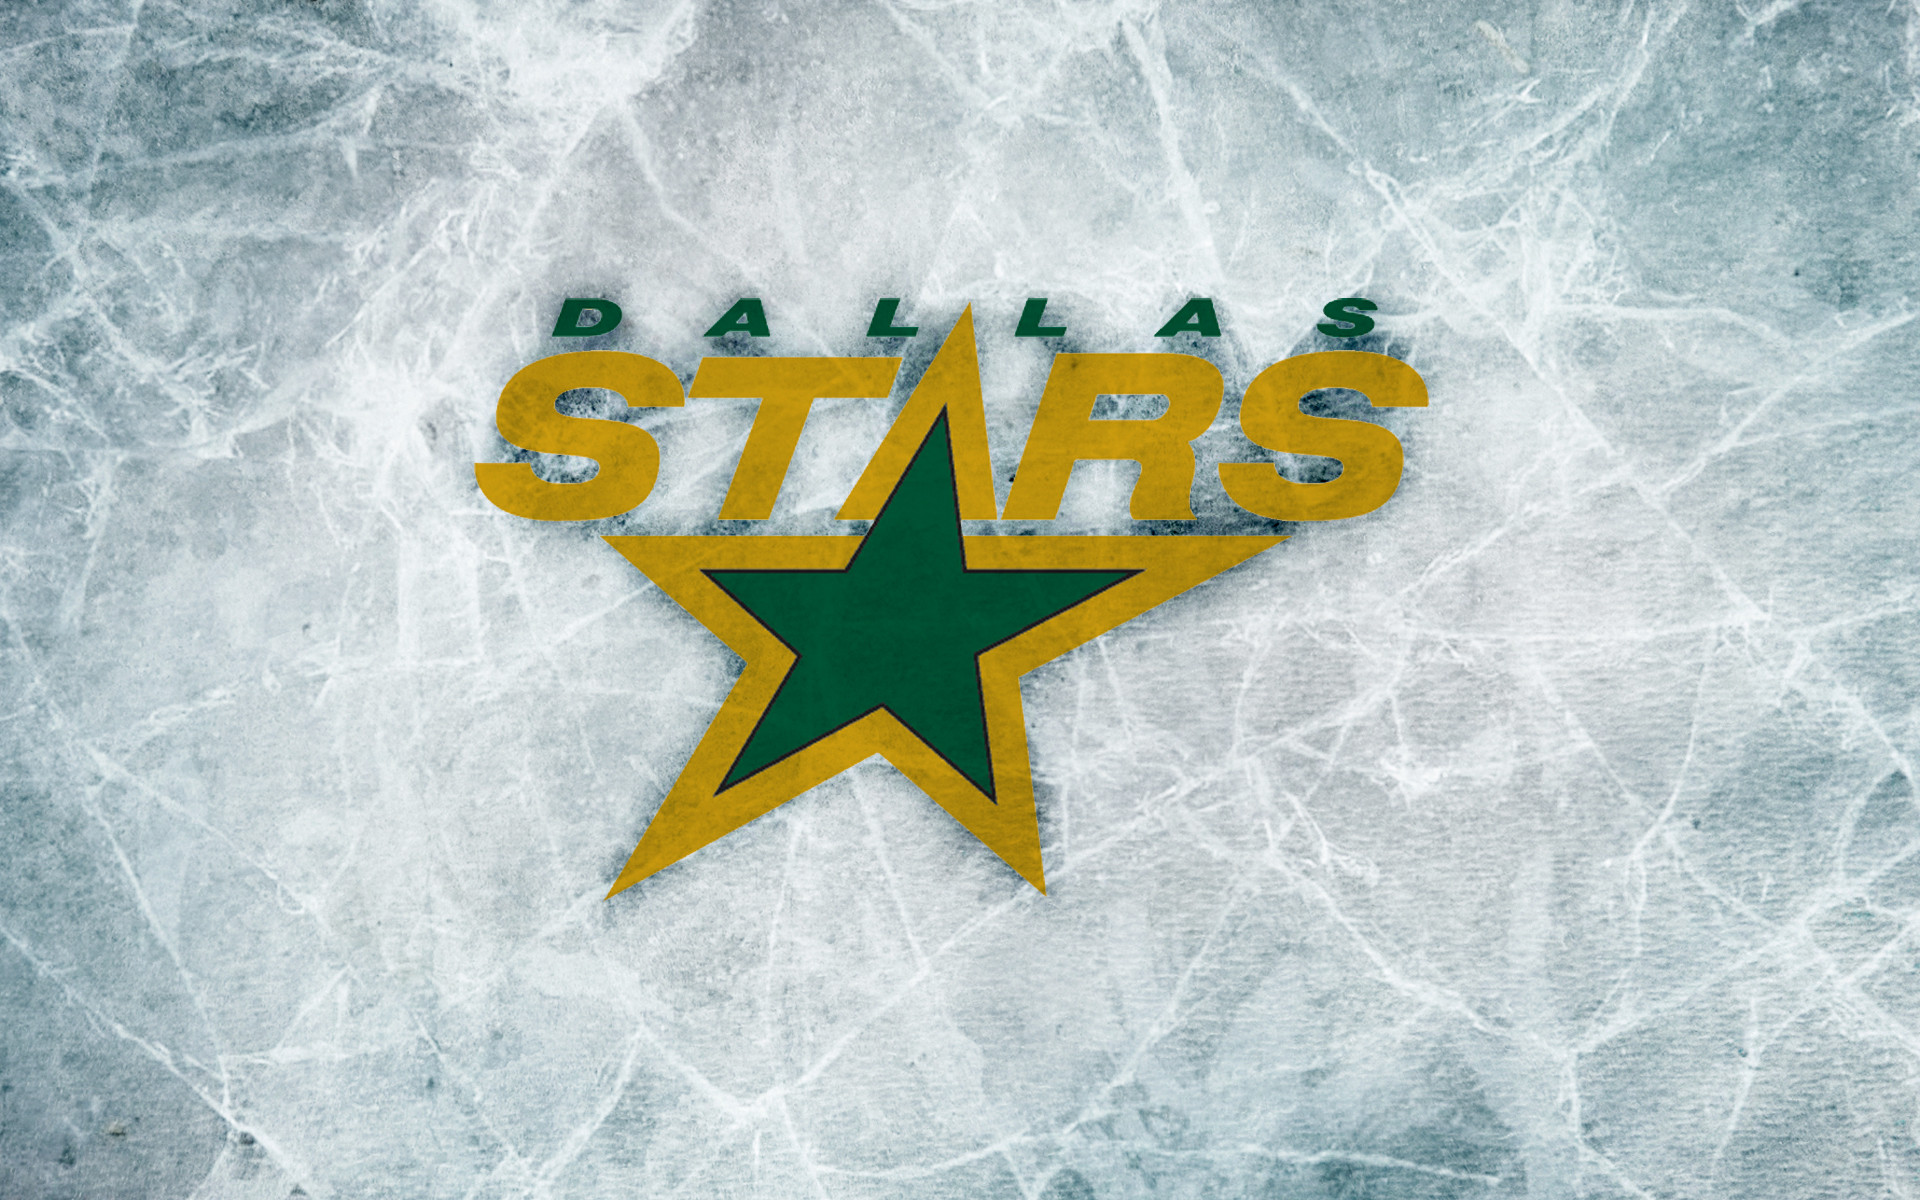 1920x1200 Related Wallpapers from Redskins Wallpaper. Dallas Stars Wallpaper